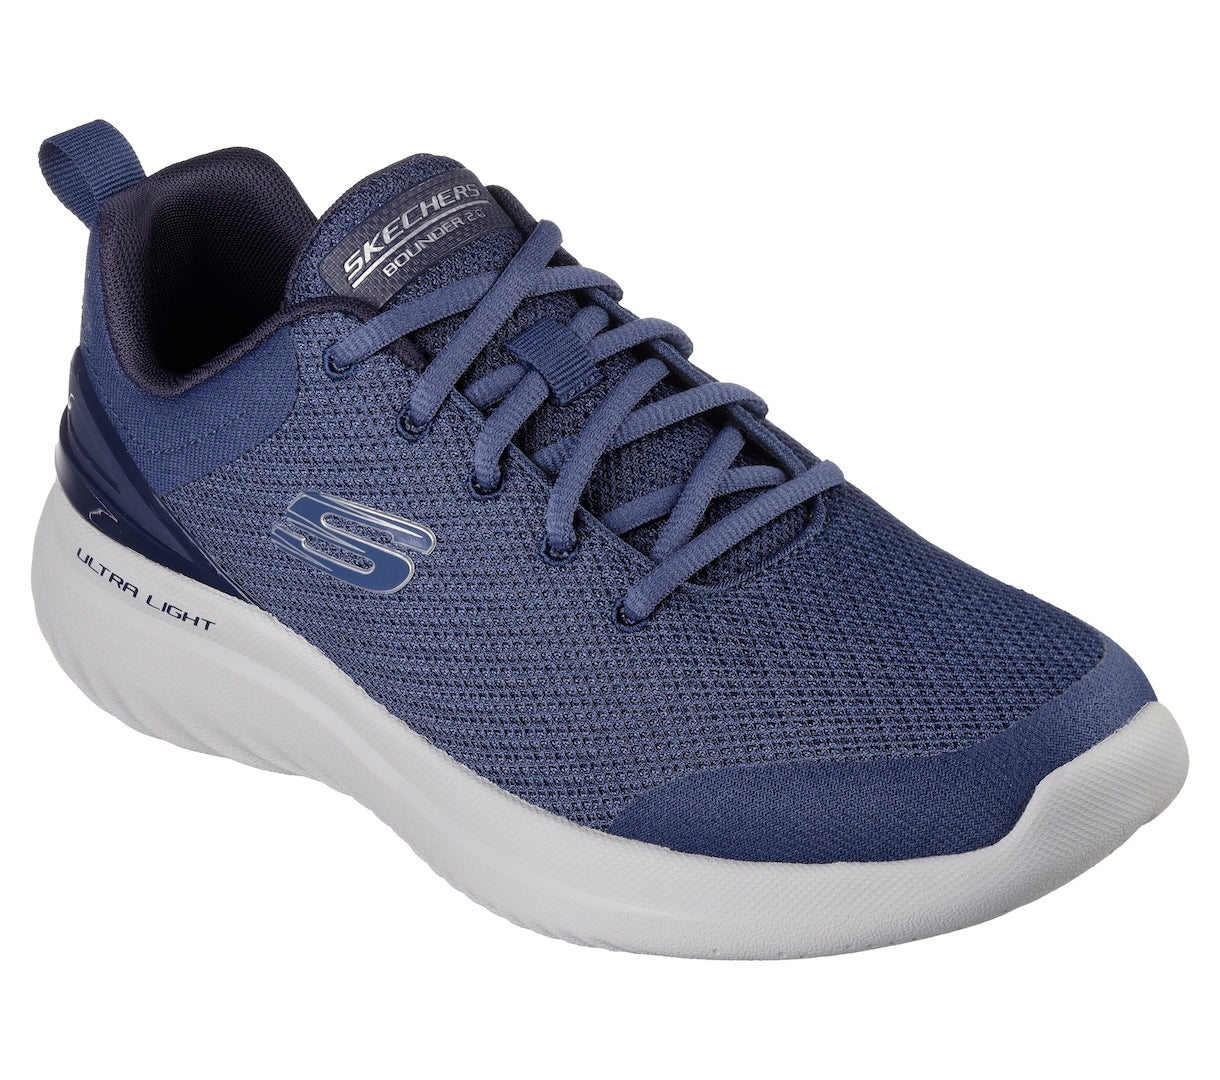 Skechers 232670 Bounder 2.0 - Nasher Mens Navy Textile Vegan Lace Up Trainers